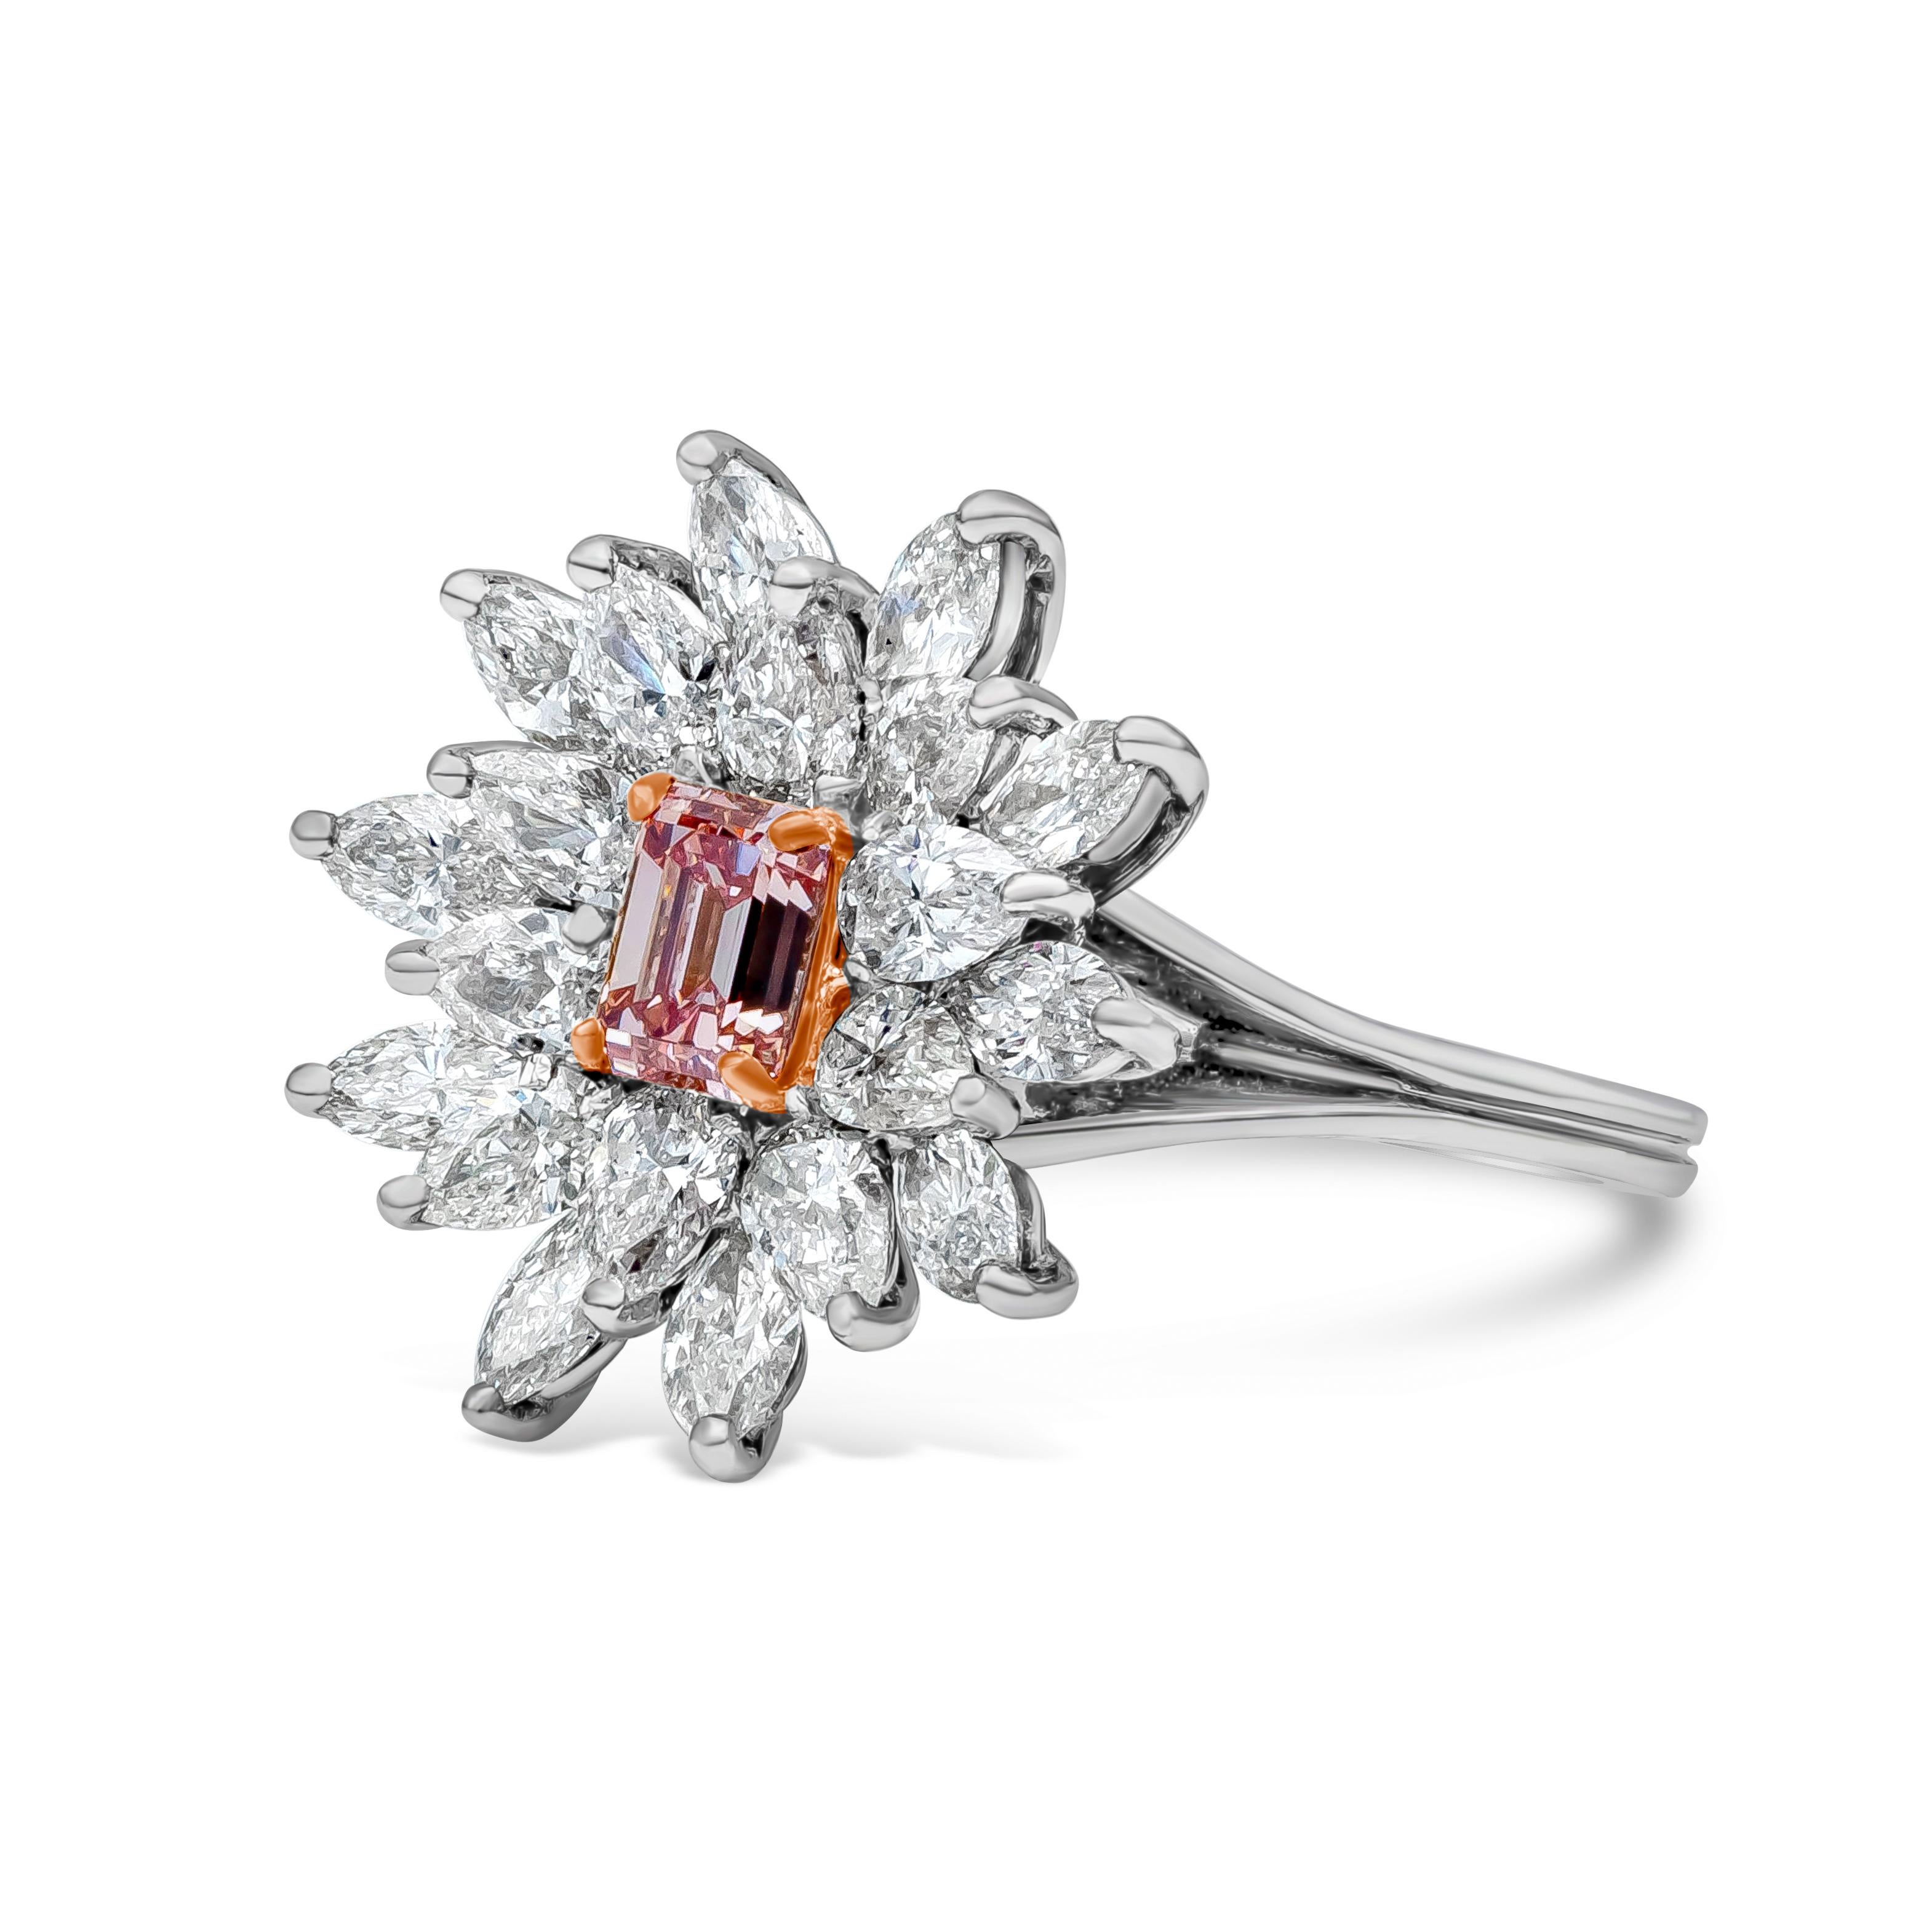 A lively and unique ring showcasing a GIA Certified 0.59 carat emerald cut, Fancy Intense Pink Color and  VS1 in Clarity. The gorgeous pink diamond is surrounded by clusters of sparkling marquise and pear shaped diamonds weighing 2 carats total. Set